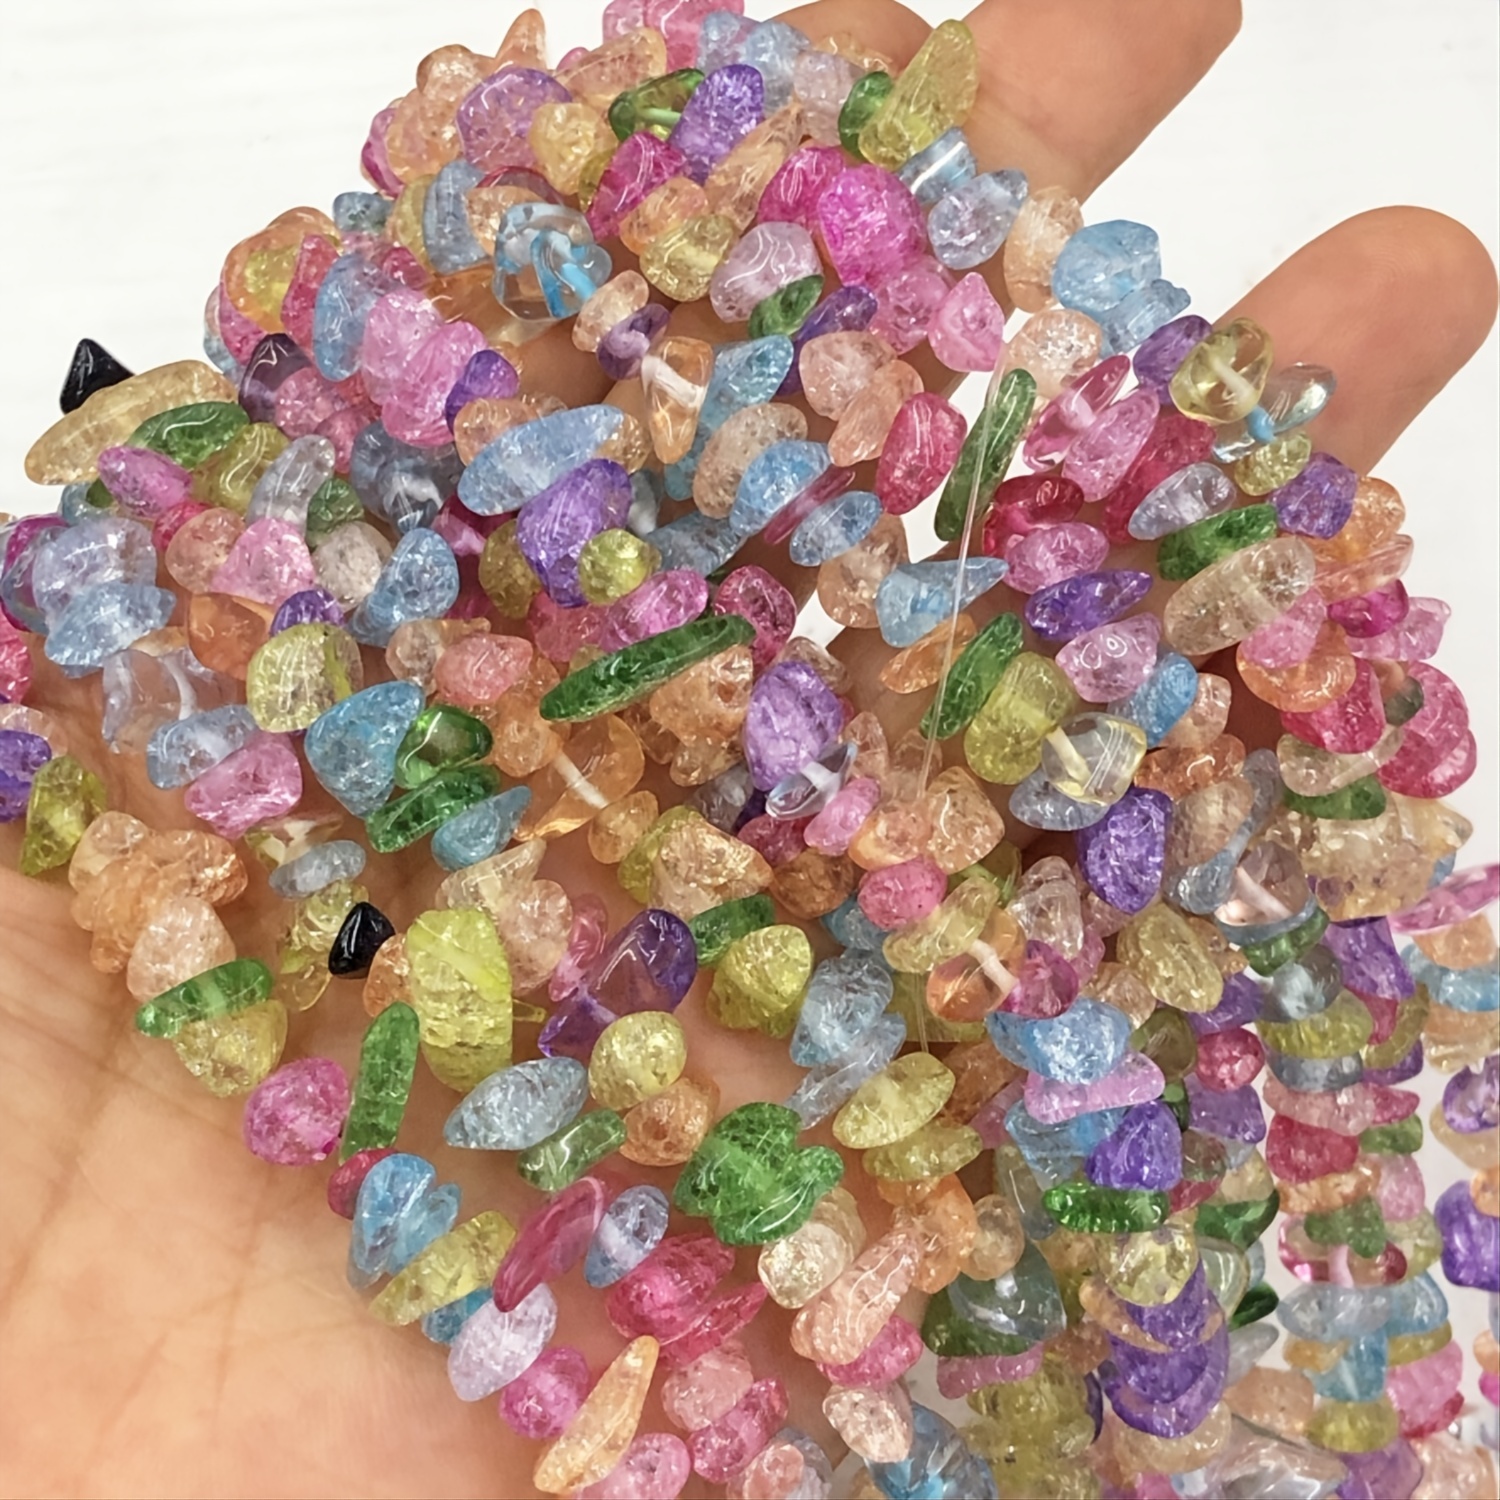 500 PCS Chip Stone Natural Chip Stone Beads 5-8mm Irregular Small Beads  Multicolor Stones for